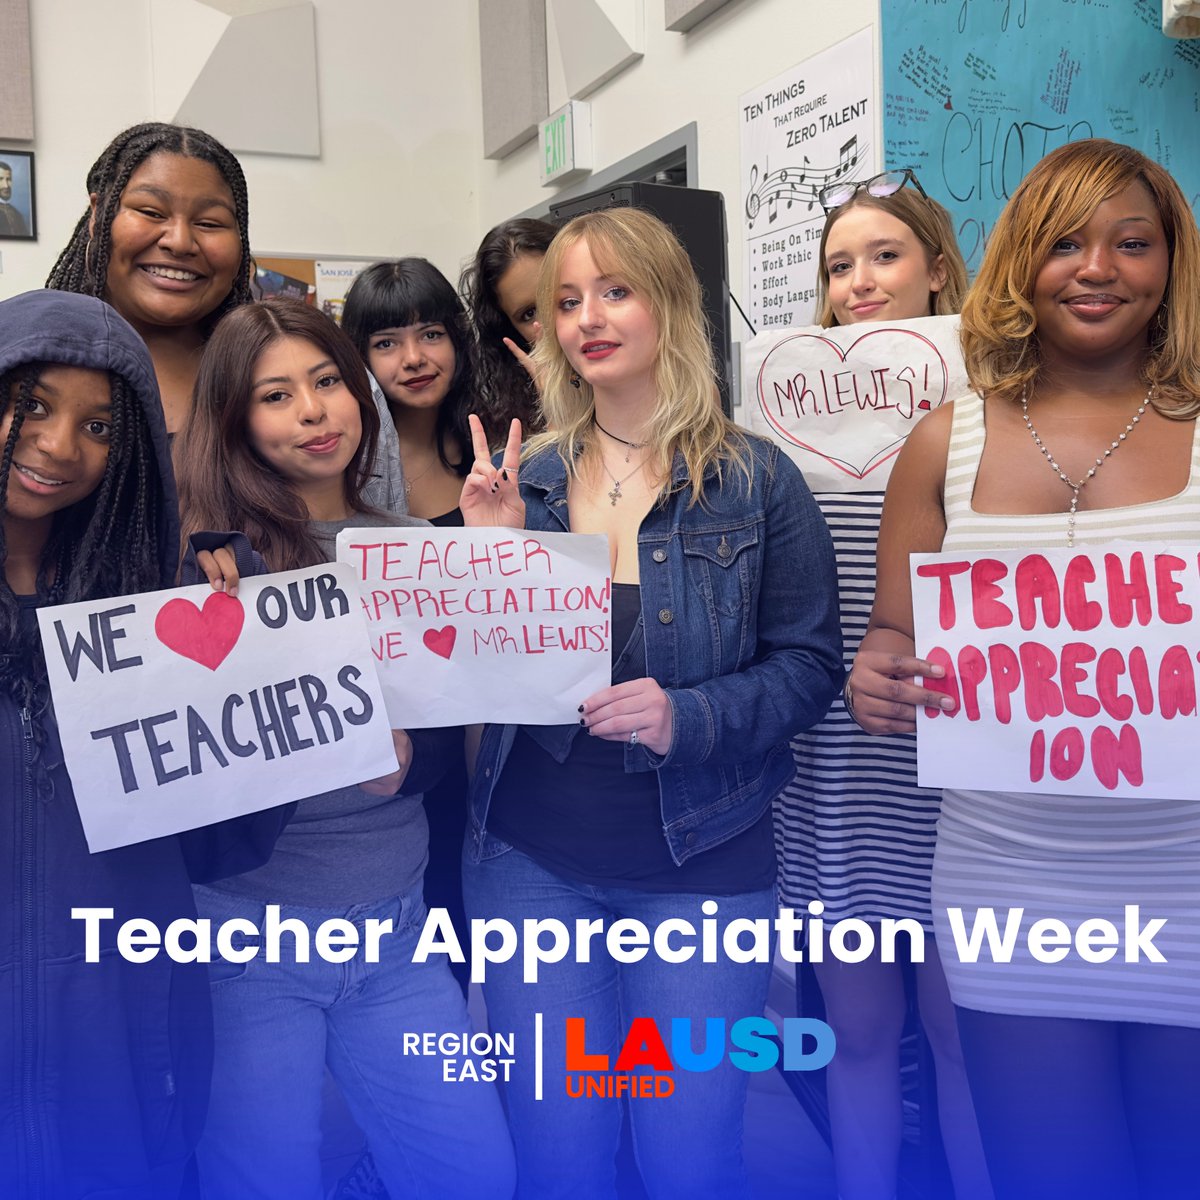 Shoutout to all of our incredible teachers who educate and inspire our students every single day. While #TeacherAppreciationWeek may be ending, our gratitude for you lasts all year long!